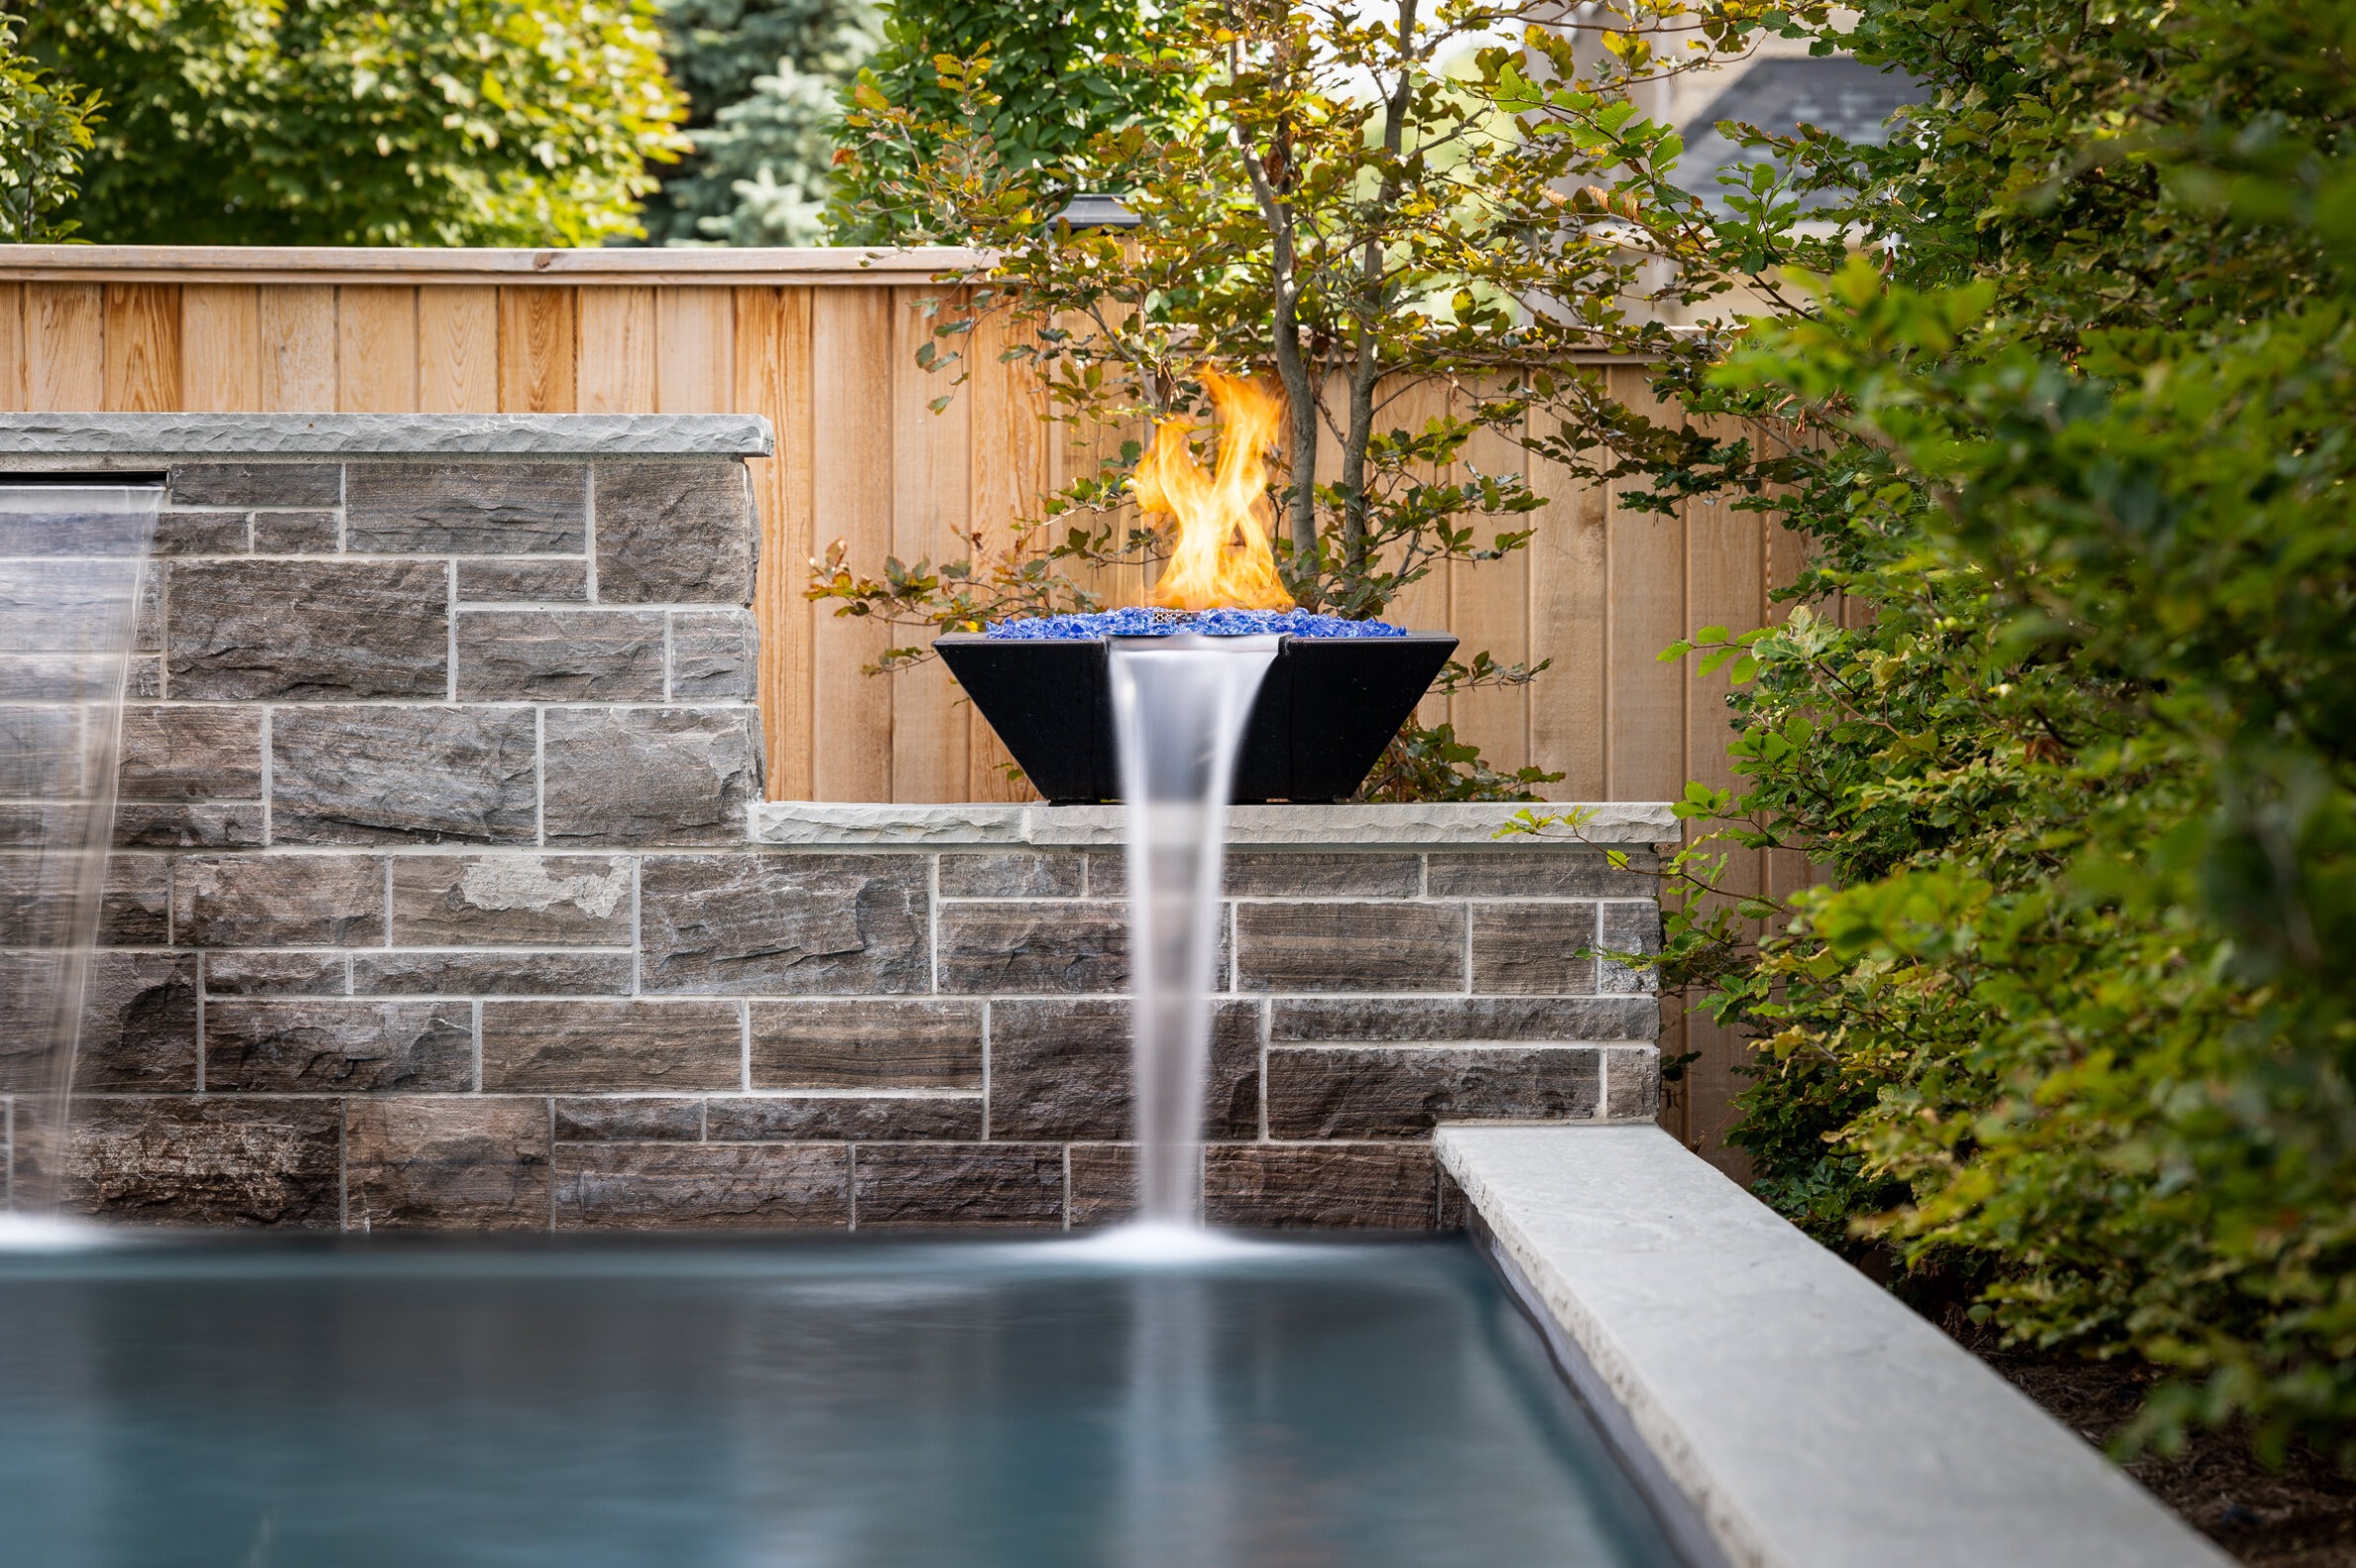 An outdoor fire pit with blue glass beads is lit with flames next to a cascading water feature by a pool, surrounded by greenery and stone walls.